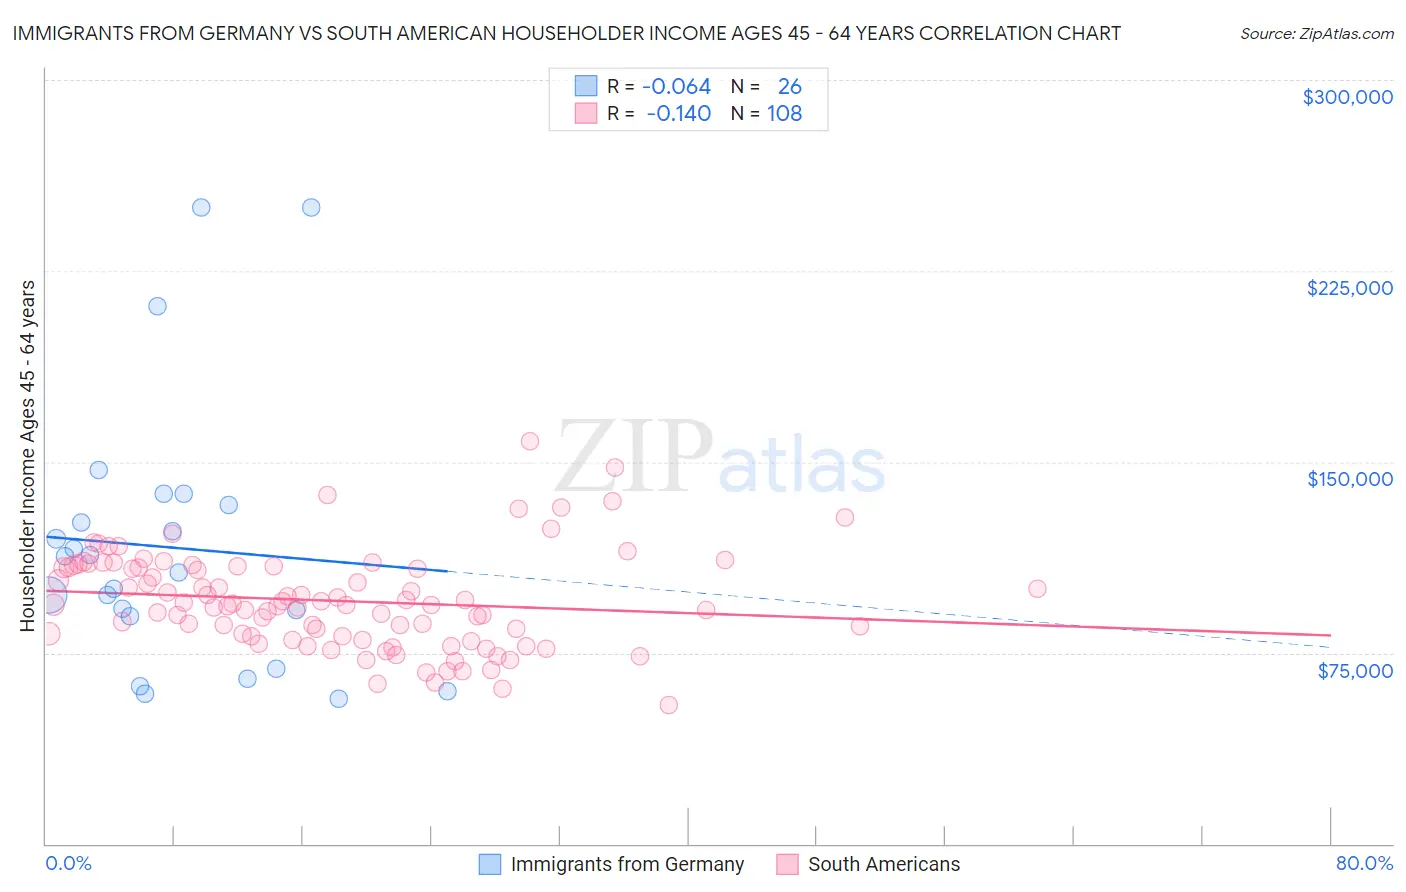 Immigrants from Germany vs South American Householder Income Ages 45 - 64 years